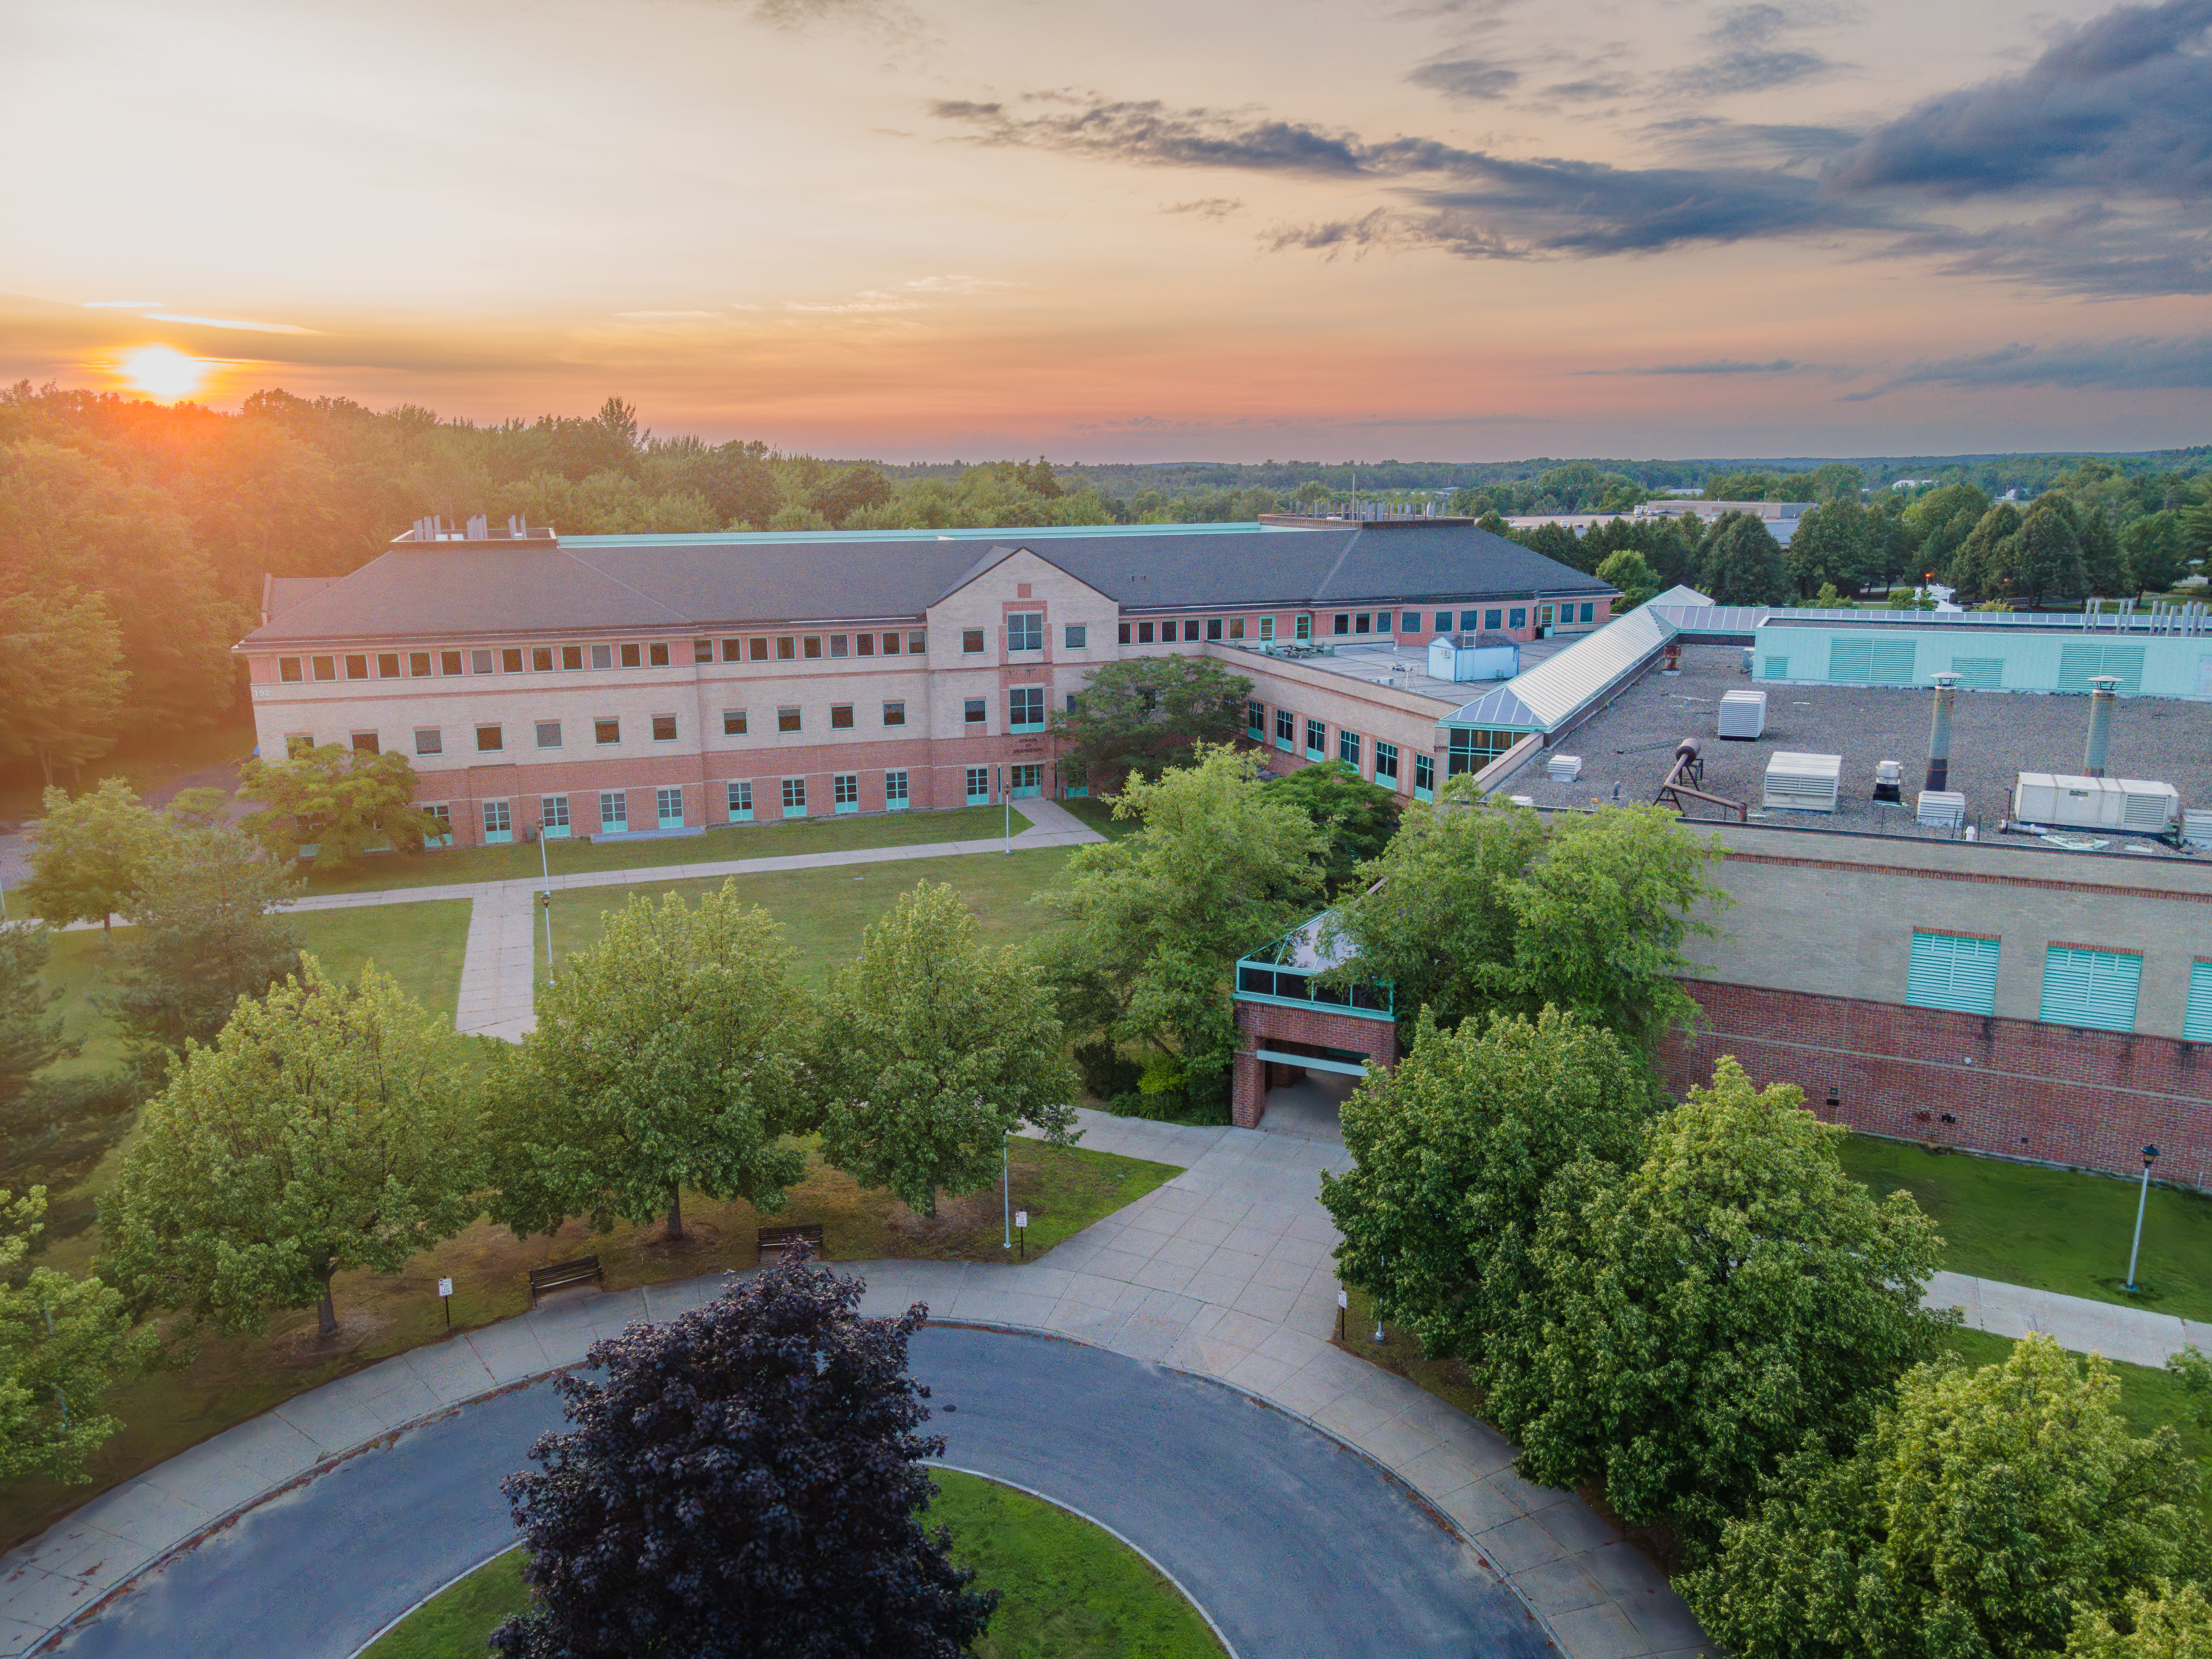 Summer aerial photo of the Center for Advanced Materials Processing (CAMP) with a sunset view in the background.